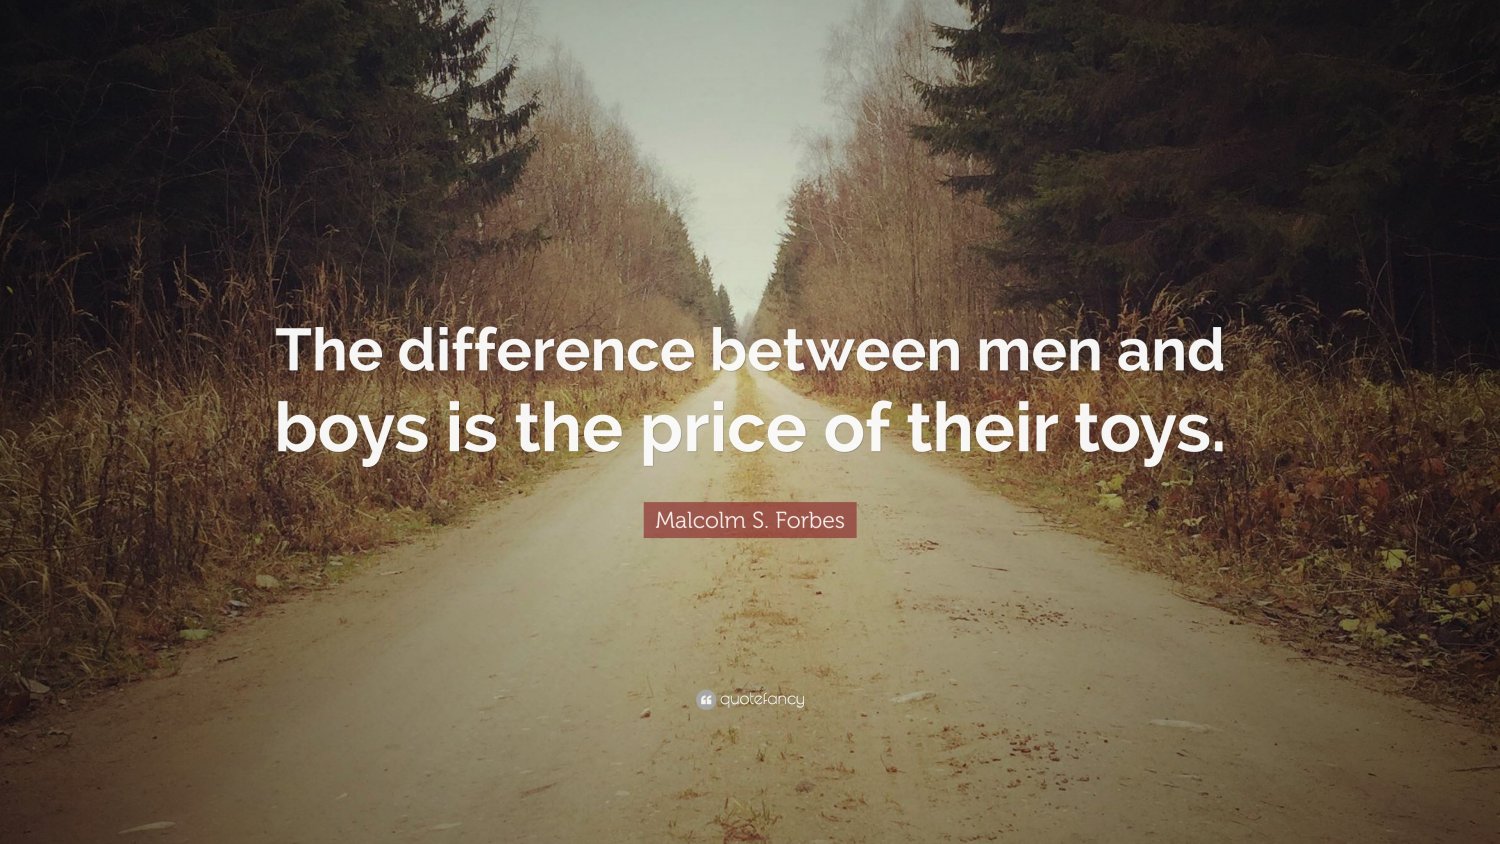 628823-Malcolm-S-Forbes-Quote-The-difference-between-men-and-boys-is-the.jpg